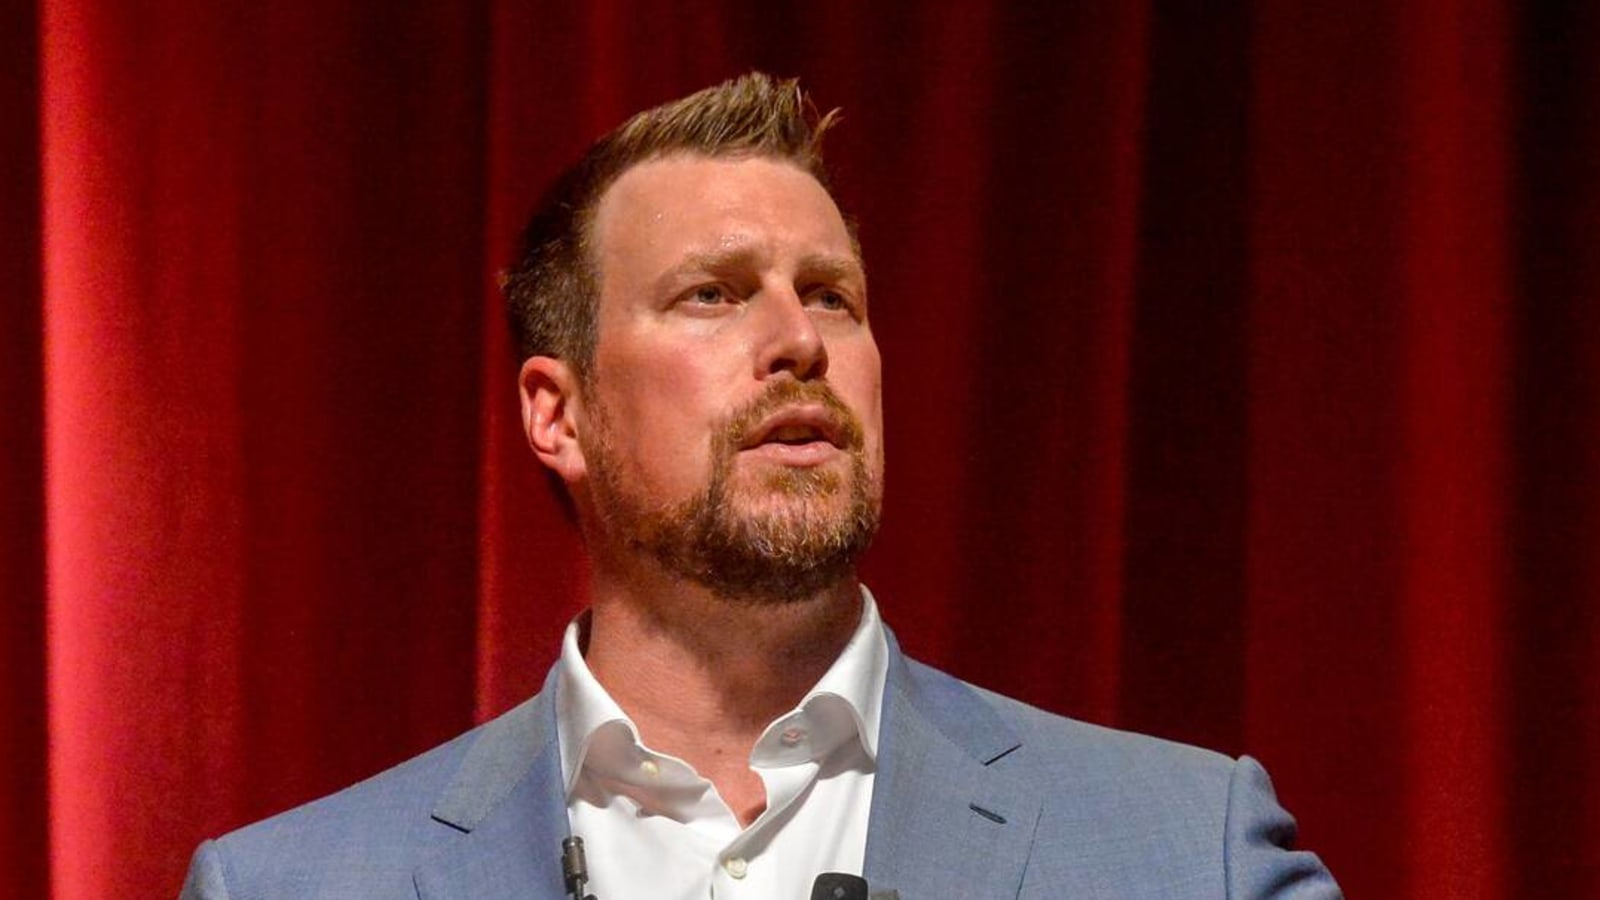 Ryan Leaf goes off on top NFL insider, accuses him of being a fraud